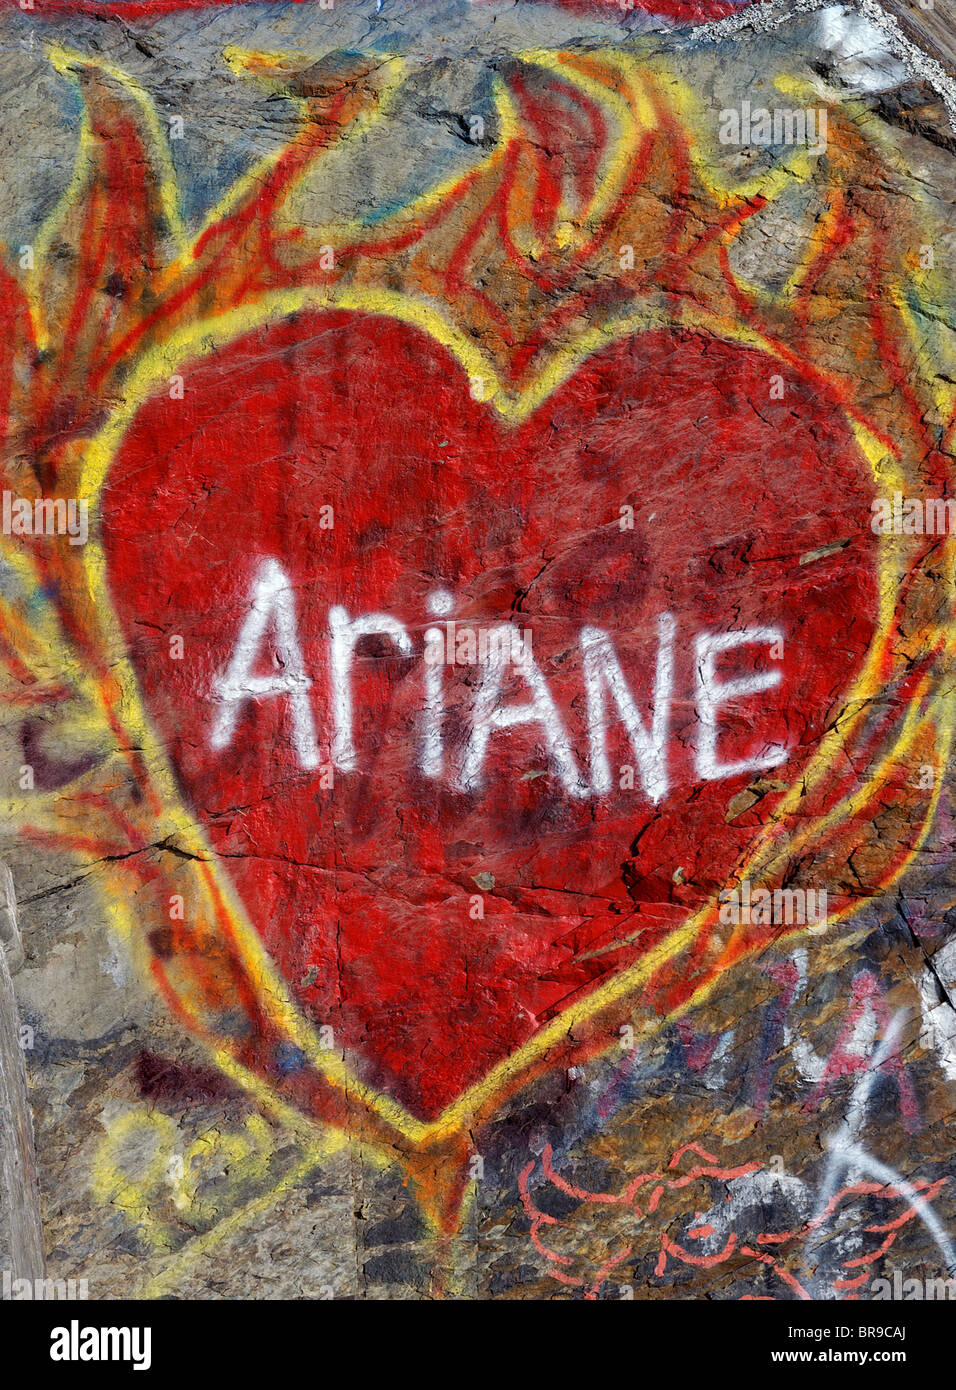 A flaming love heart painted on a wall Stock Photo